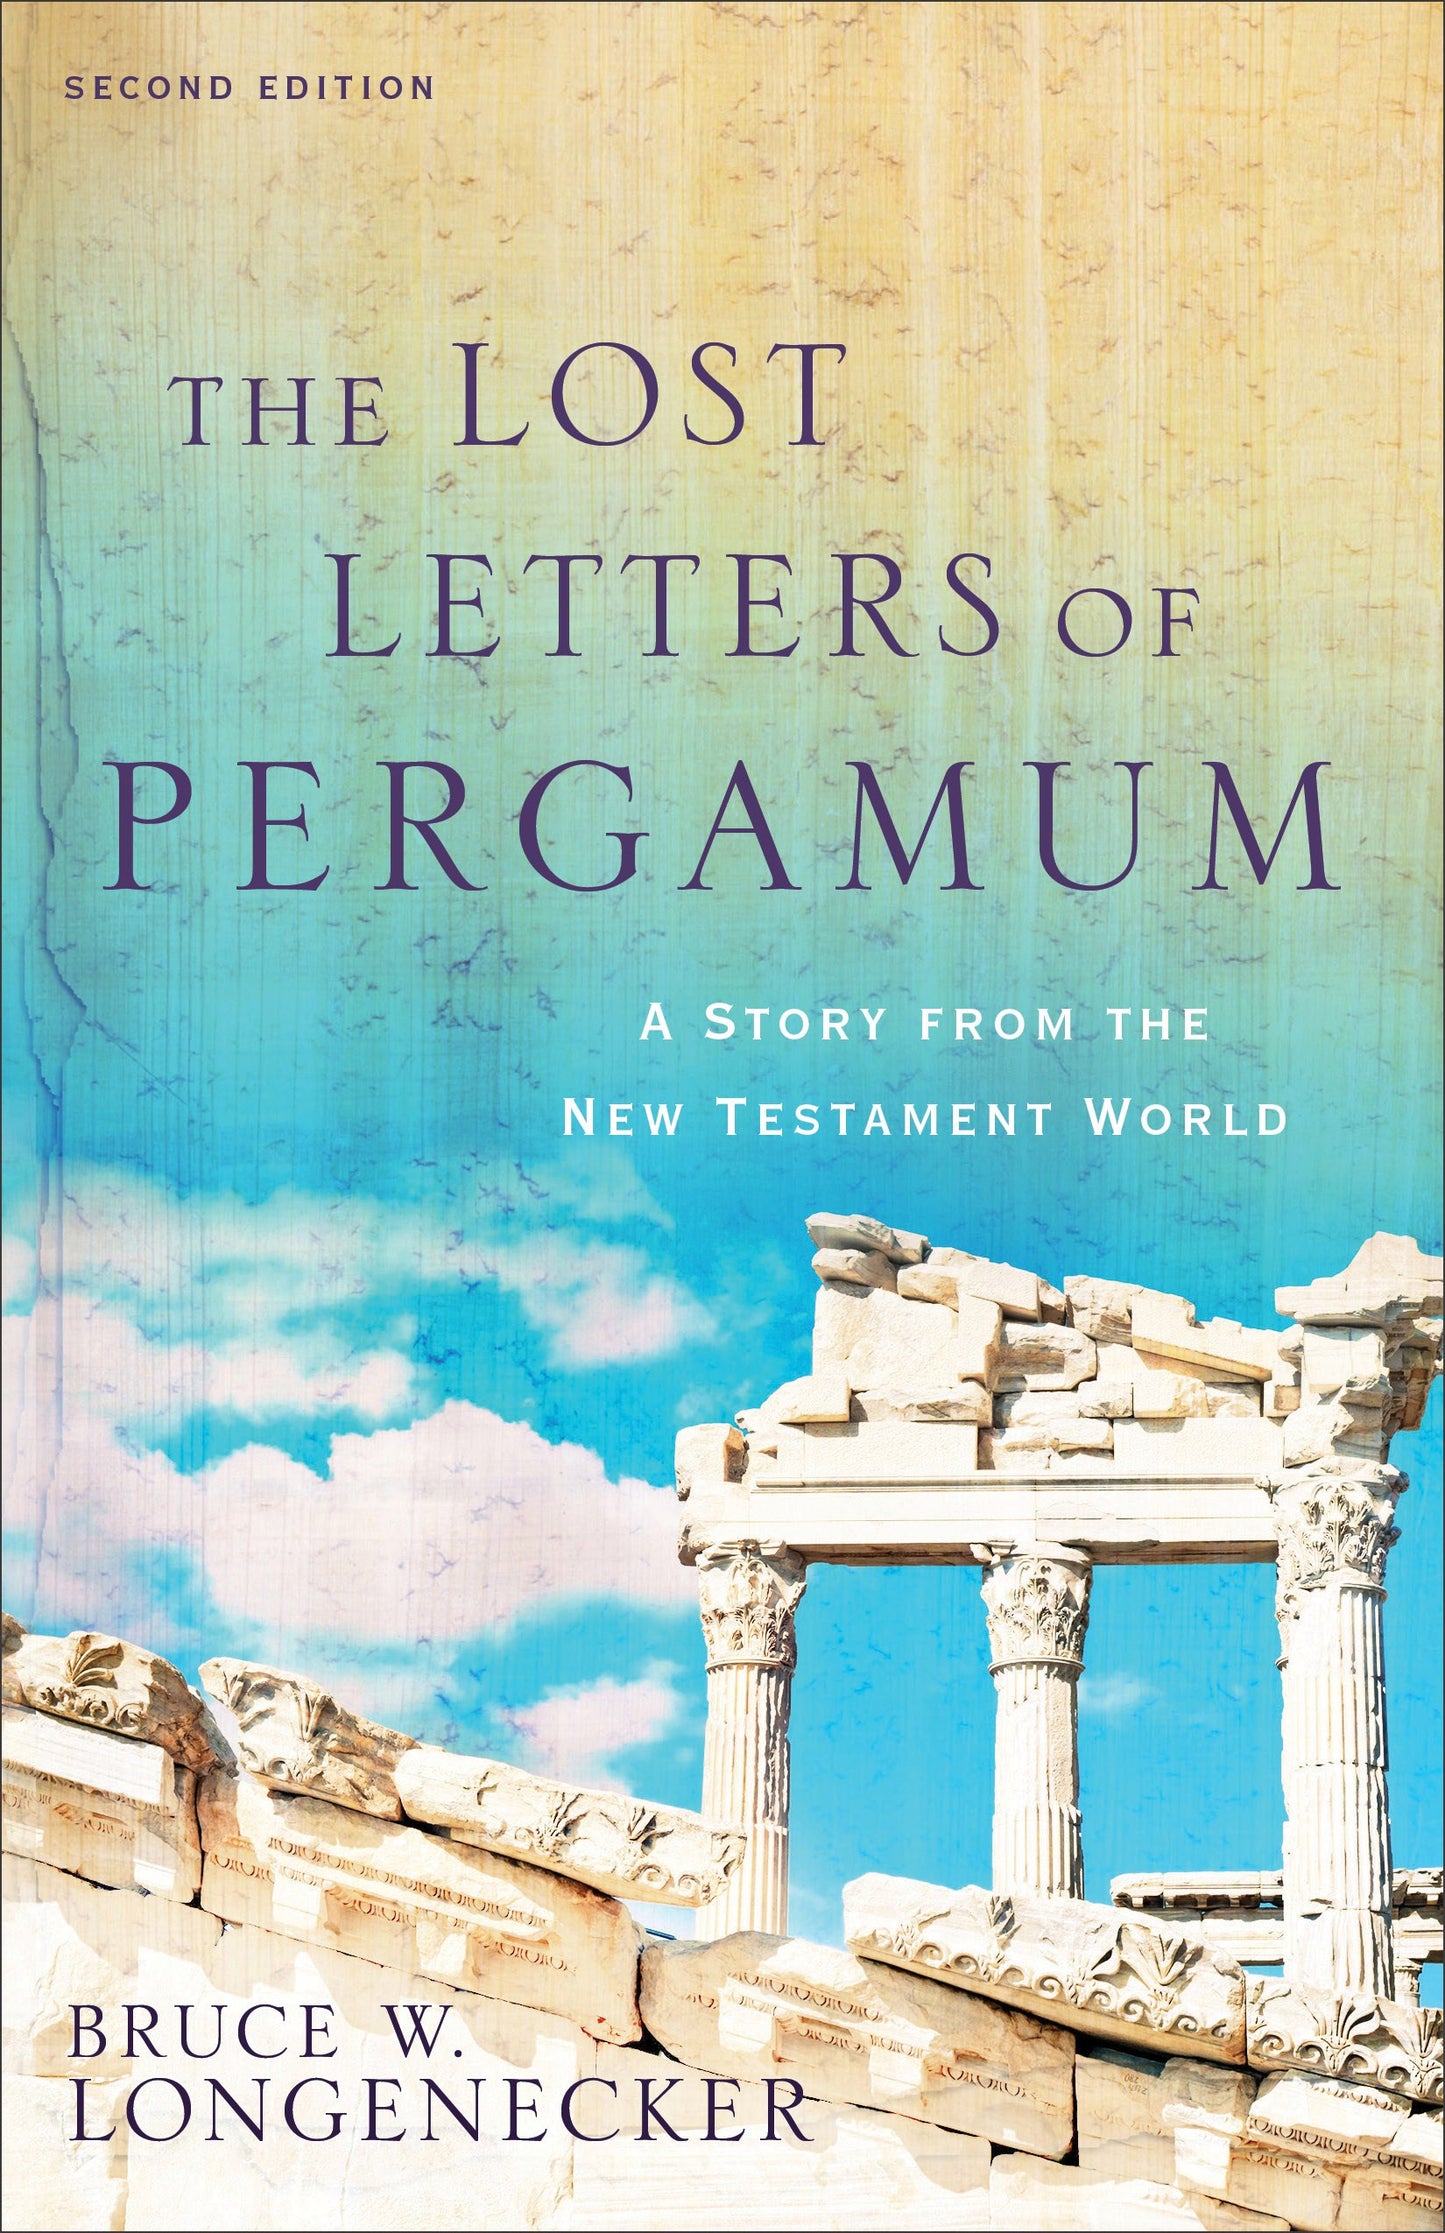 The Lost Letters Of Pergamum (Second Edition)